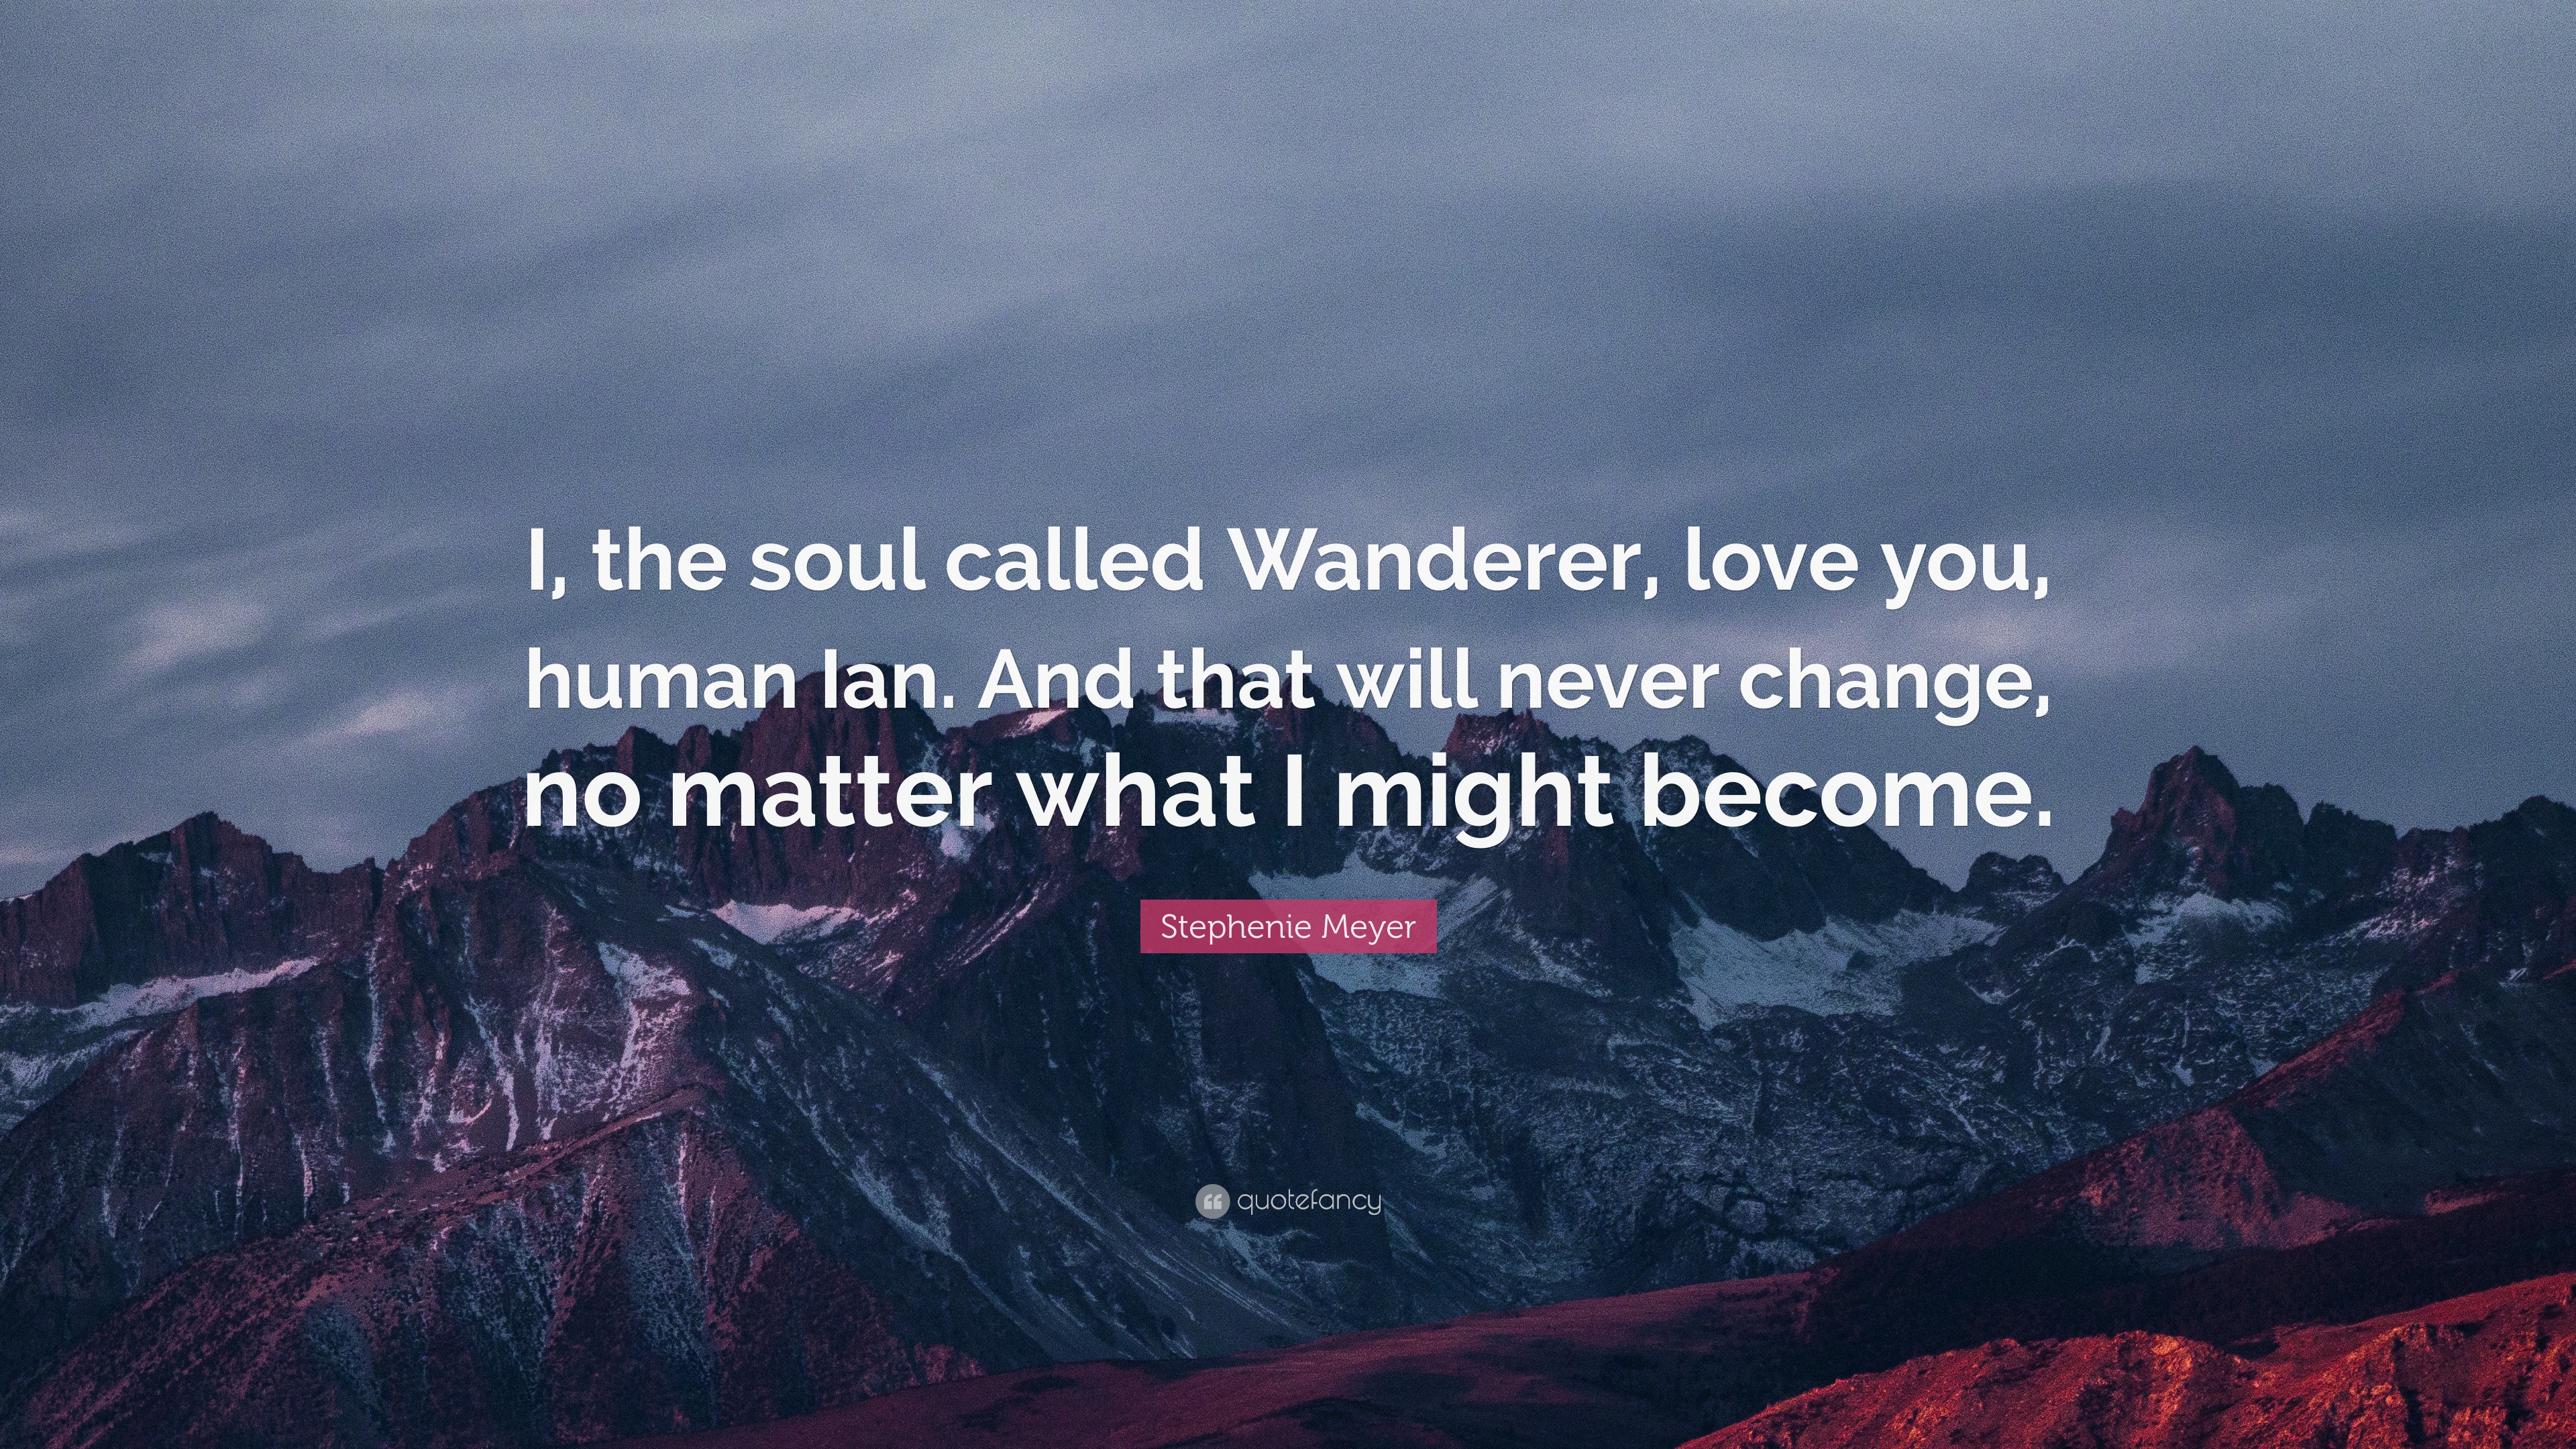 Stephenie Meyer Quote “I the soul called Wanderer love you human